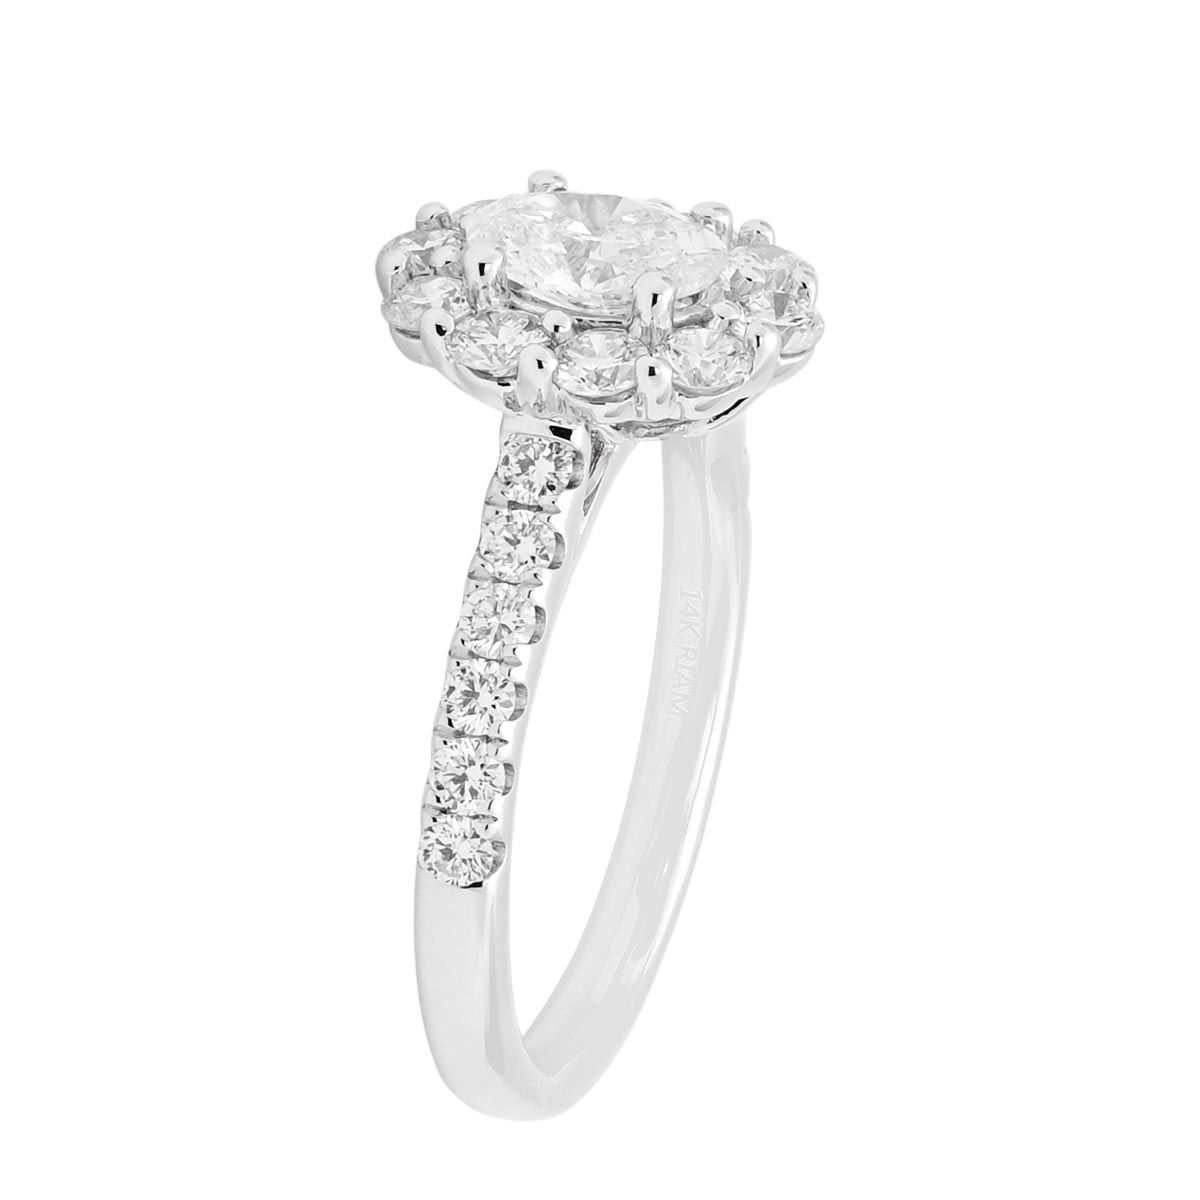 Northern Star Oval Diamond Halo Engagement Ring in 14kt White Gold (1 1/2ct tw)